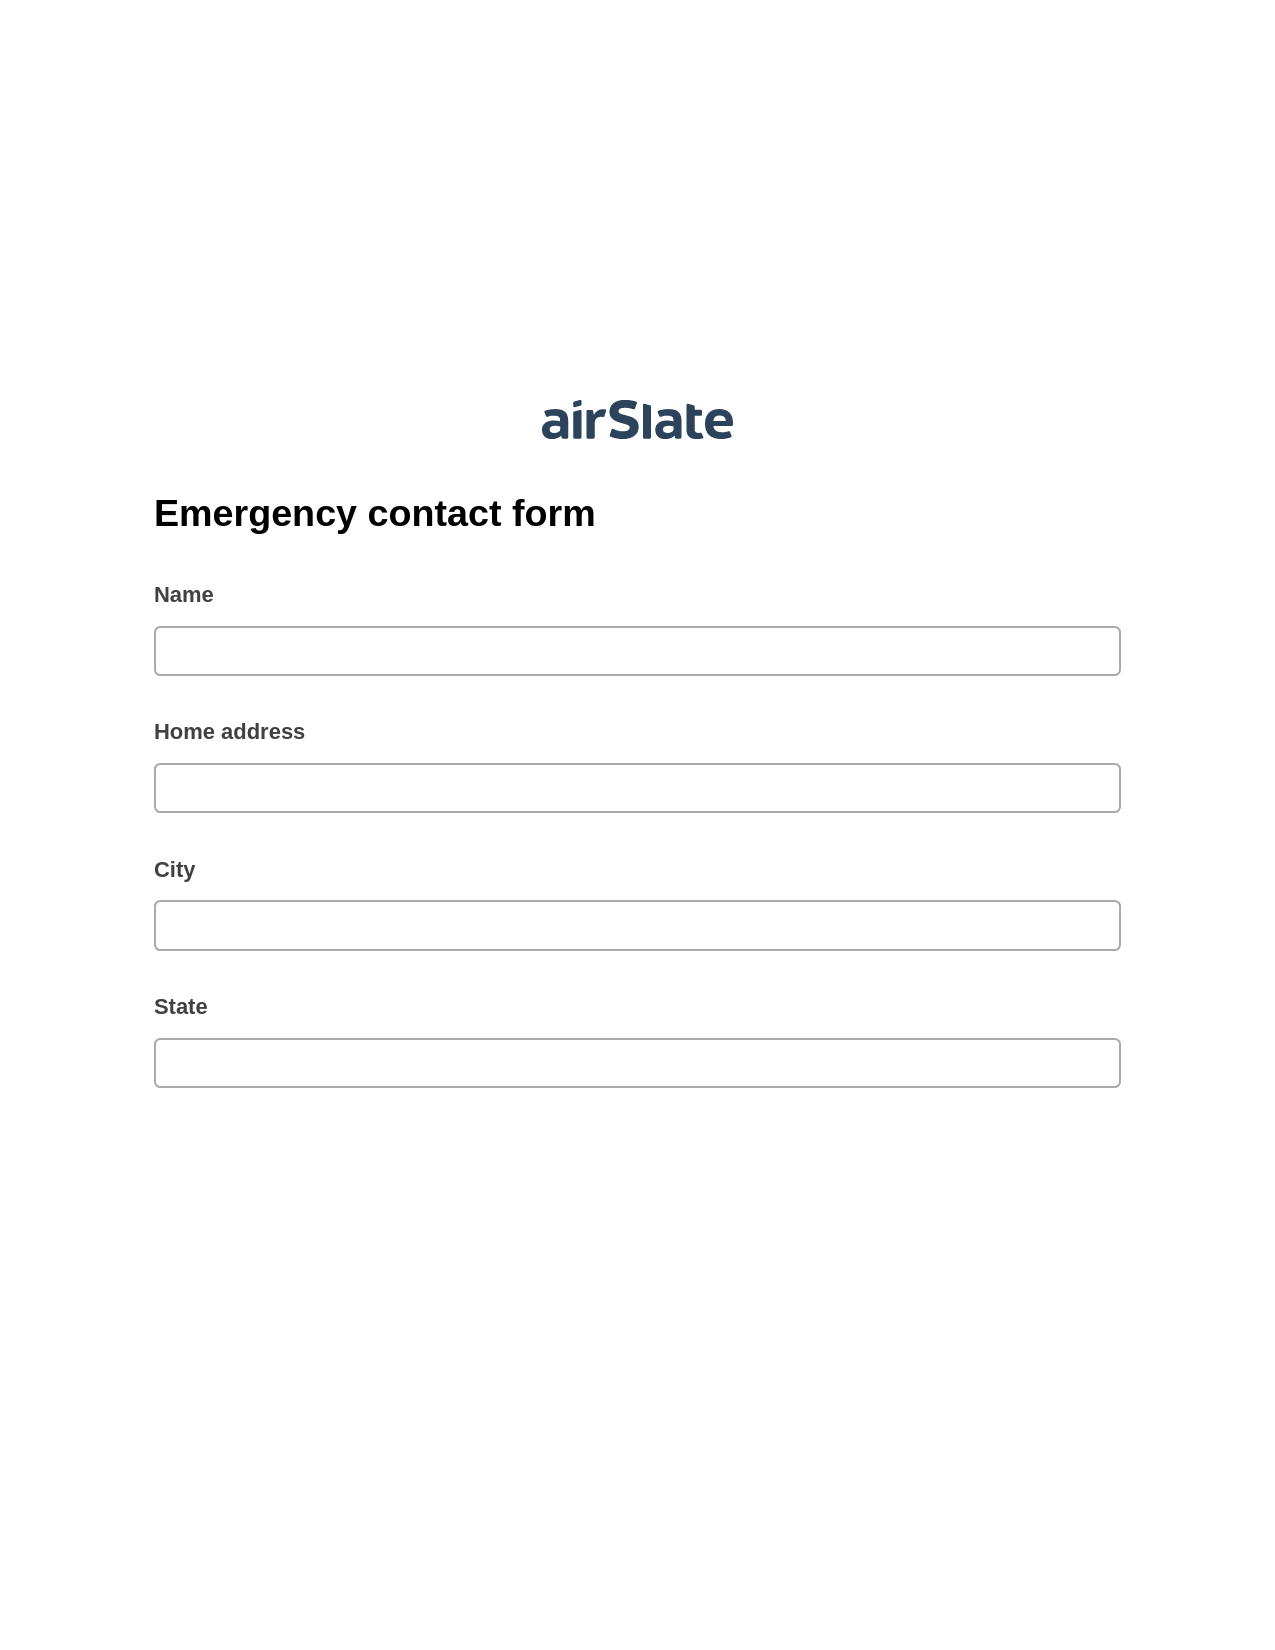 Multirole Emergency contact form Pre-fill from Salesforce Record Bot, Audit Trail Bot, Email Notification Postfinish Bot